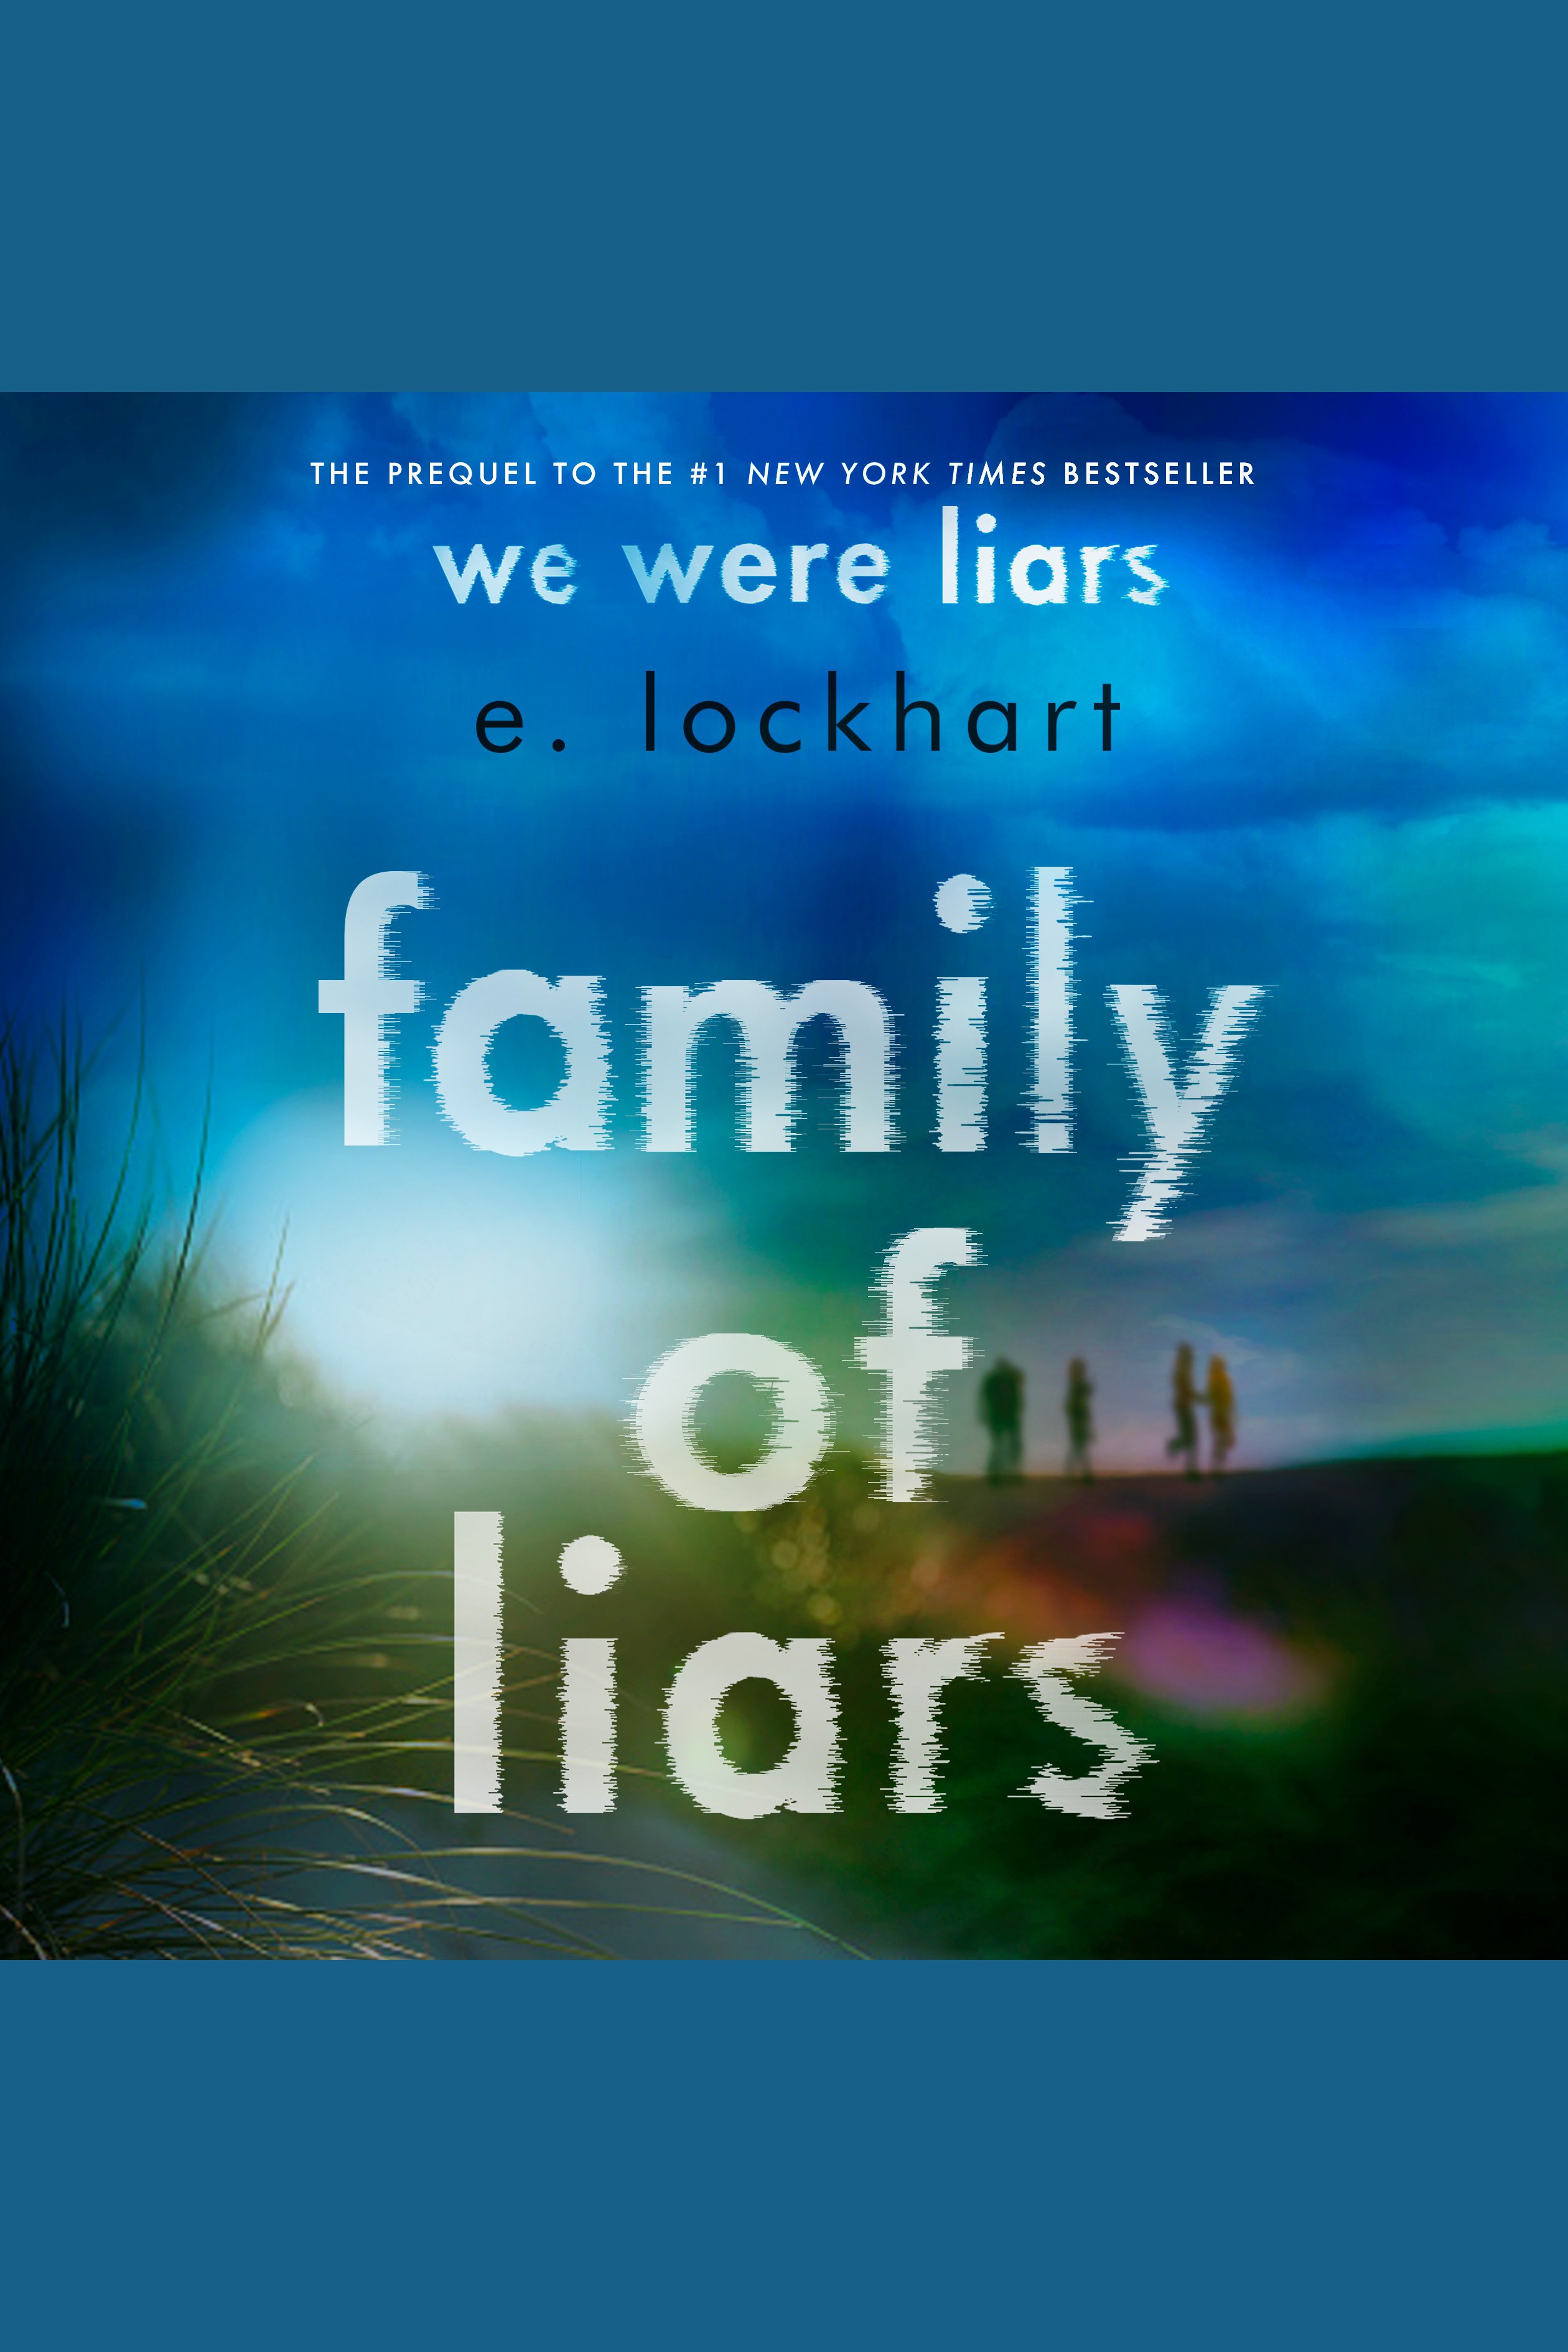 Family of liars